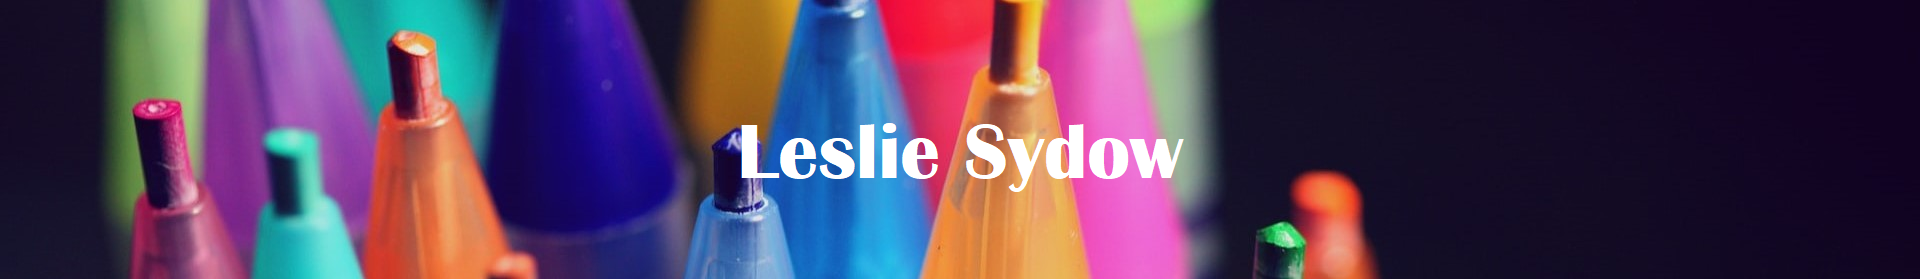 Leslie_Sydow_banner.png